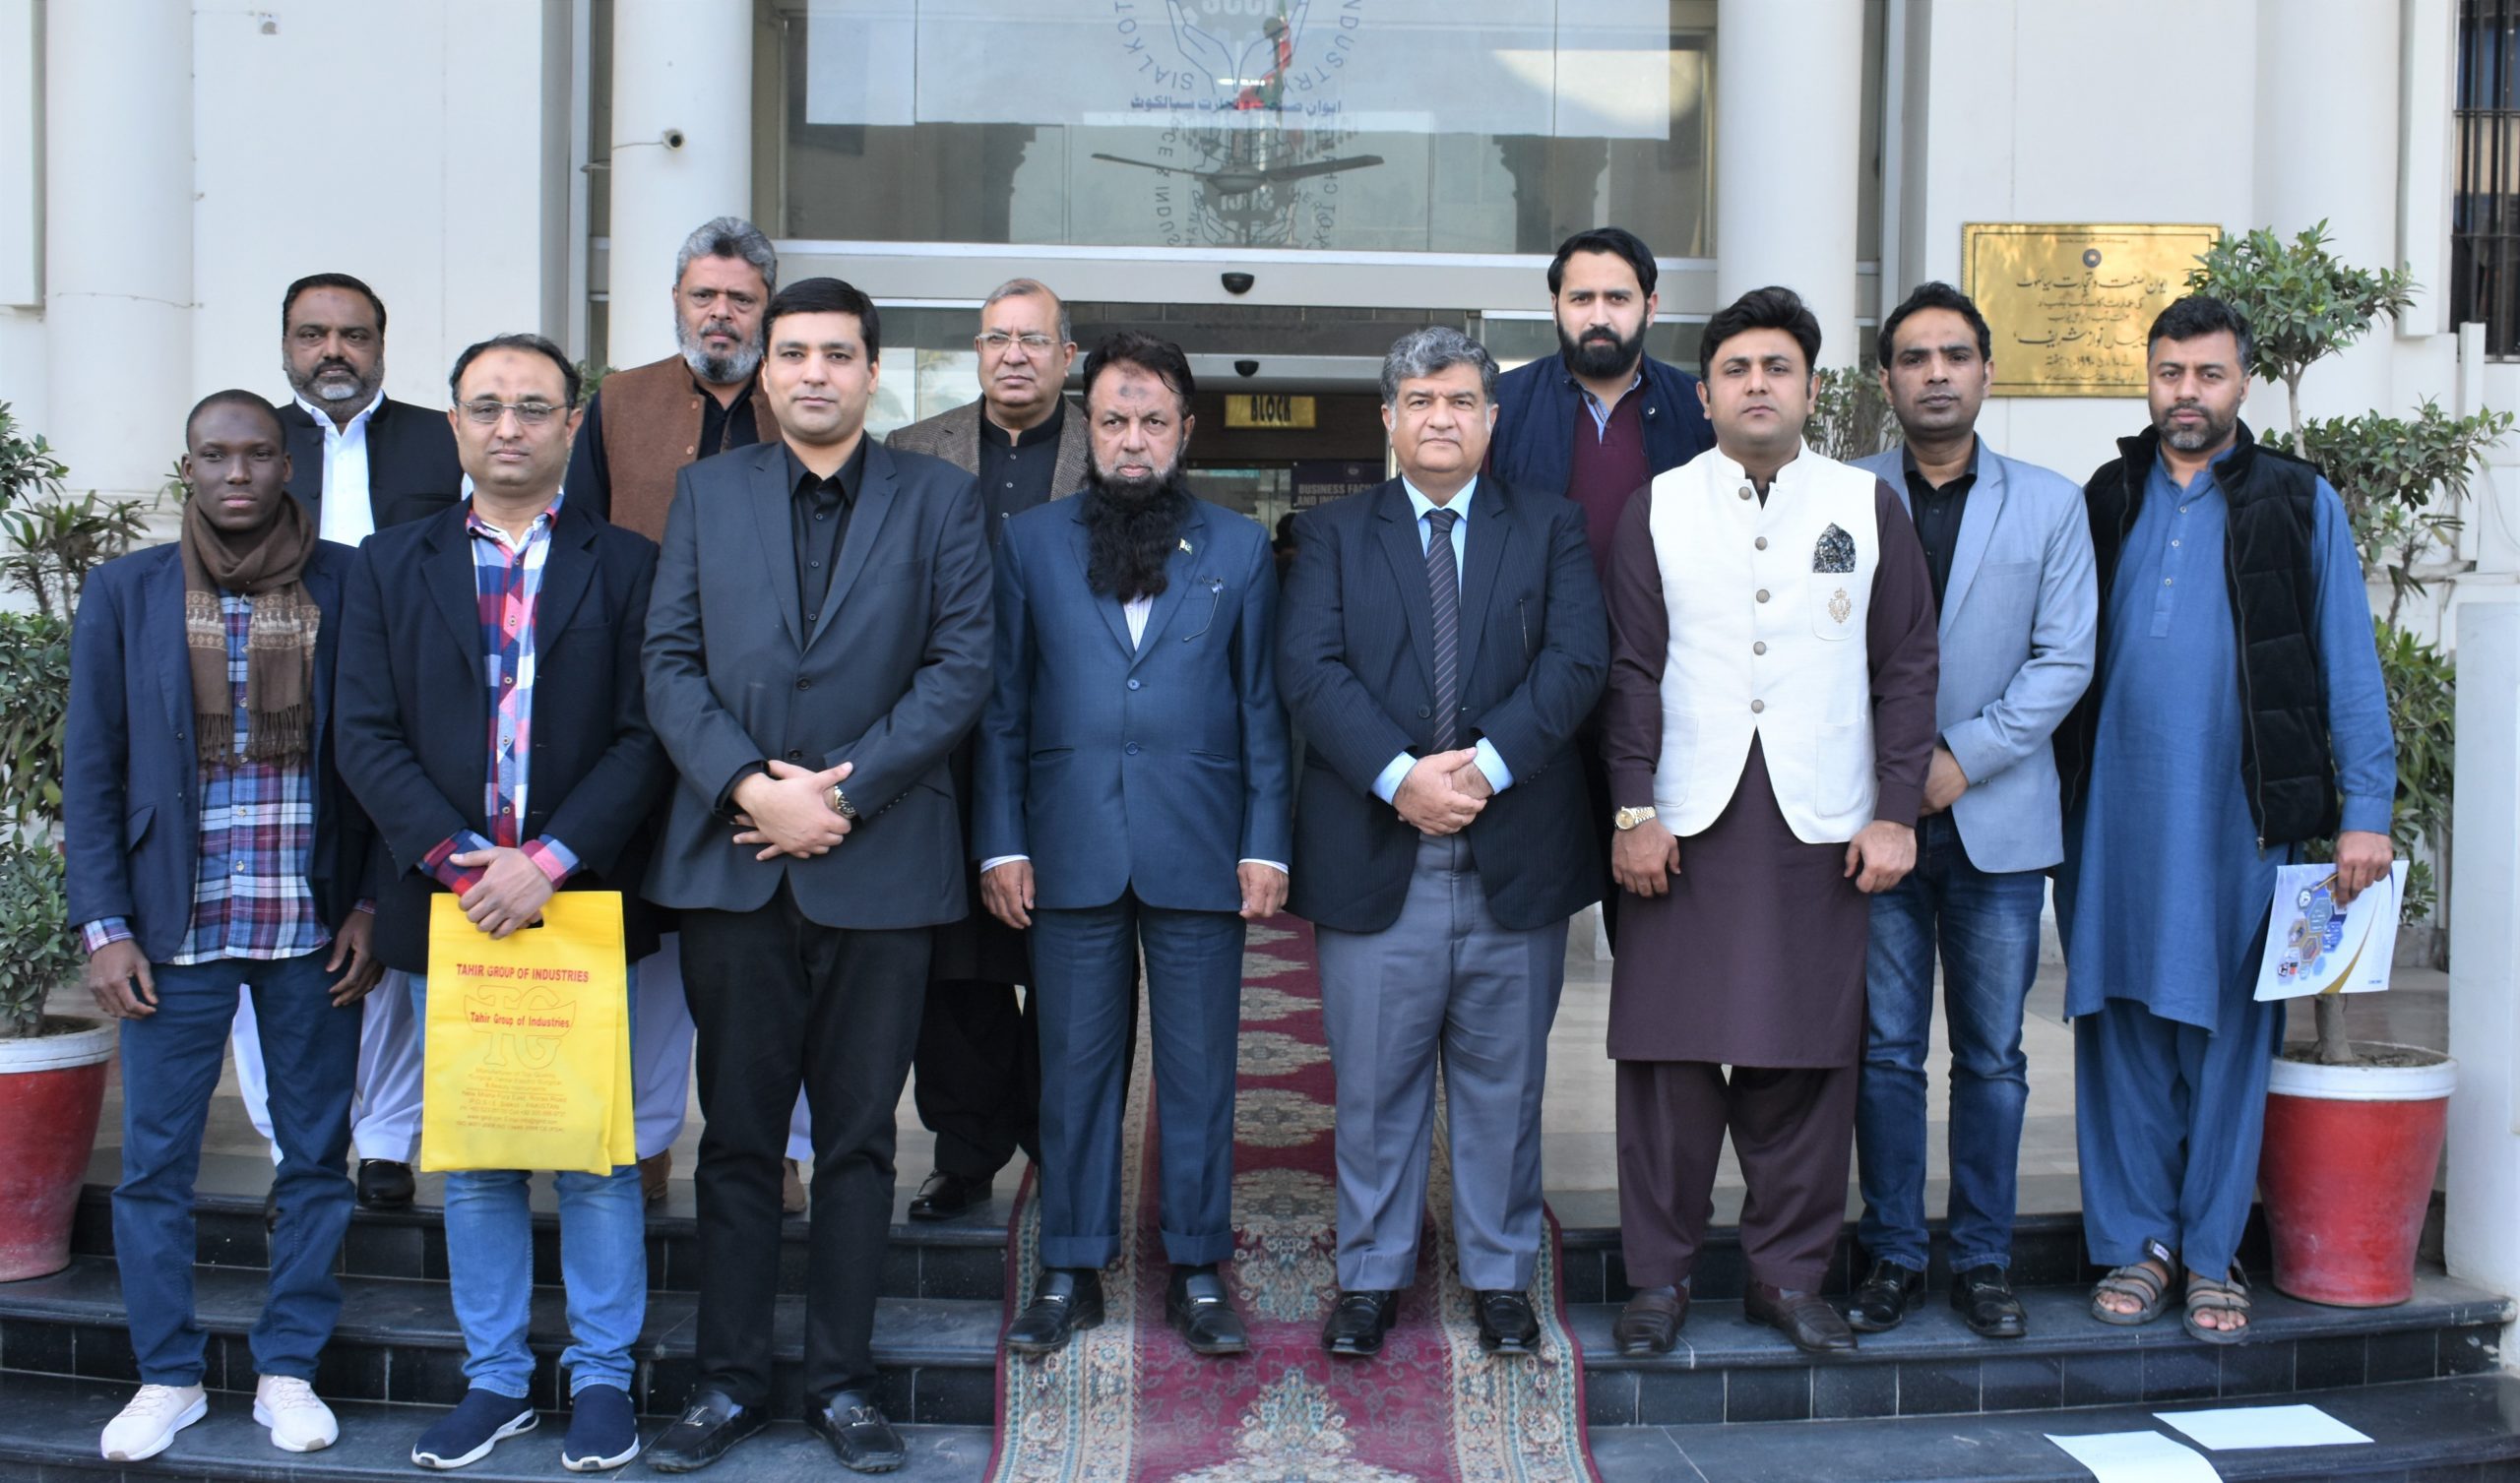 On March 04, 2022, His Excellency Mr. Ahmed Ali Sirohey, Ambassador of Pakistan to Niger visited Sialkot Chamber of Commerce and Industry. 🇵🇰🇳🇪 Mian Imran Akbar, President, Sheikh Zohaib Rafique, Senior Vice President and Mr. Qasim Malik, Vice President, Sialkot Chamber received the honorable guest and shared immense pleasure on His Excellency’s visit to Sialkot Chamber.  Mian Imran Akbar stressed that both countries should facilitate single country trade exhibitions and frequent trade delegation should be exchanged between both countries to encourage B2B Linkages. On the occasion, Sheikh Zohaib Rafique Sethi said that Africa is a huge market and made in Sialkot products have great potential in African region.  H.E. Ahmed Ali Sirohey appreciated the projects completed under Sialkot Chamber and assured his full cooperation in providing facilitation in boosting economic activity by improving cooperation and creating private sector linkages.